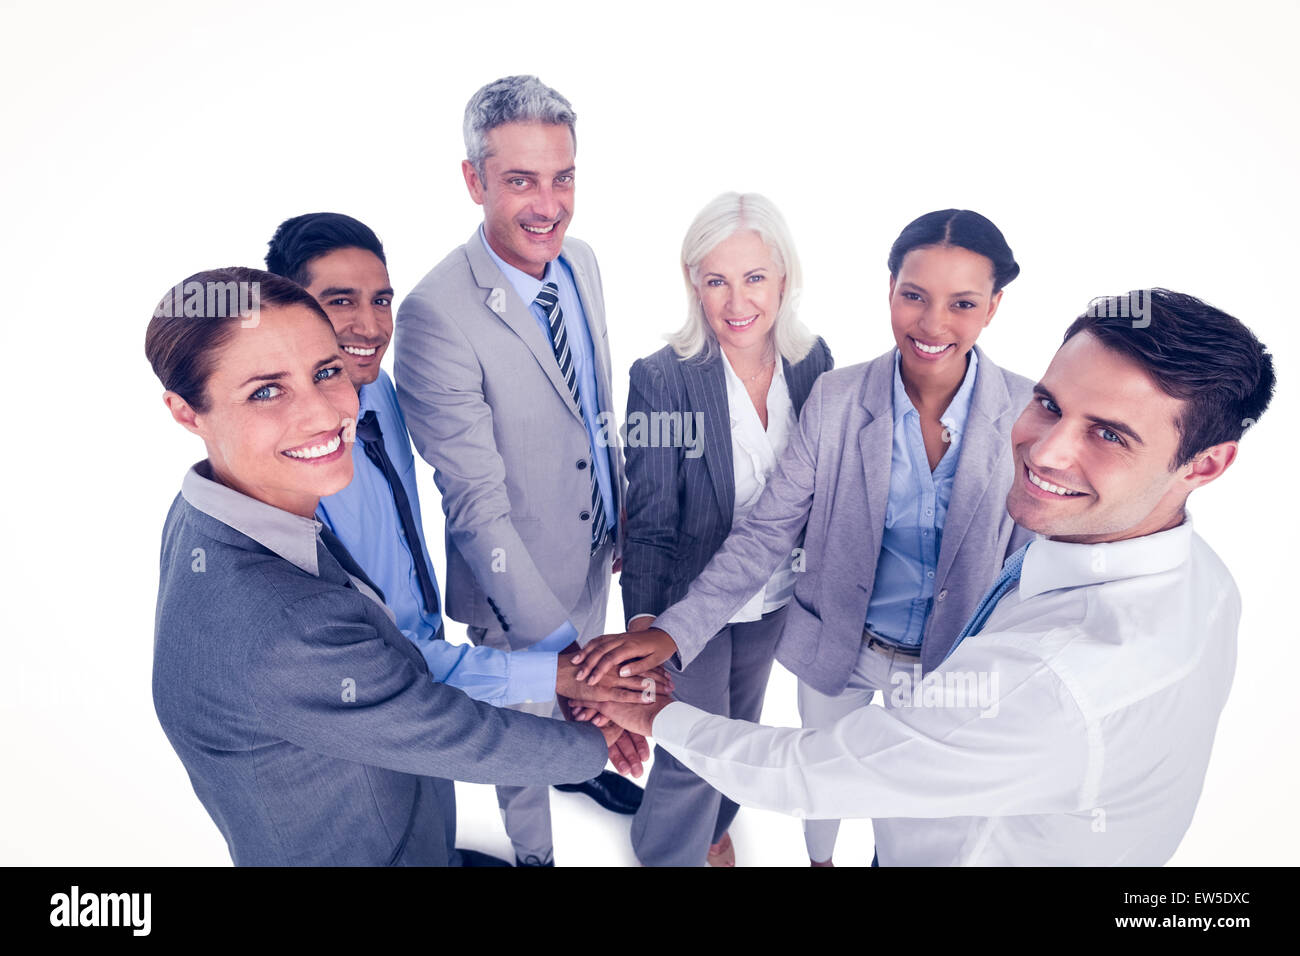 Executives holding hands together Stock Photo